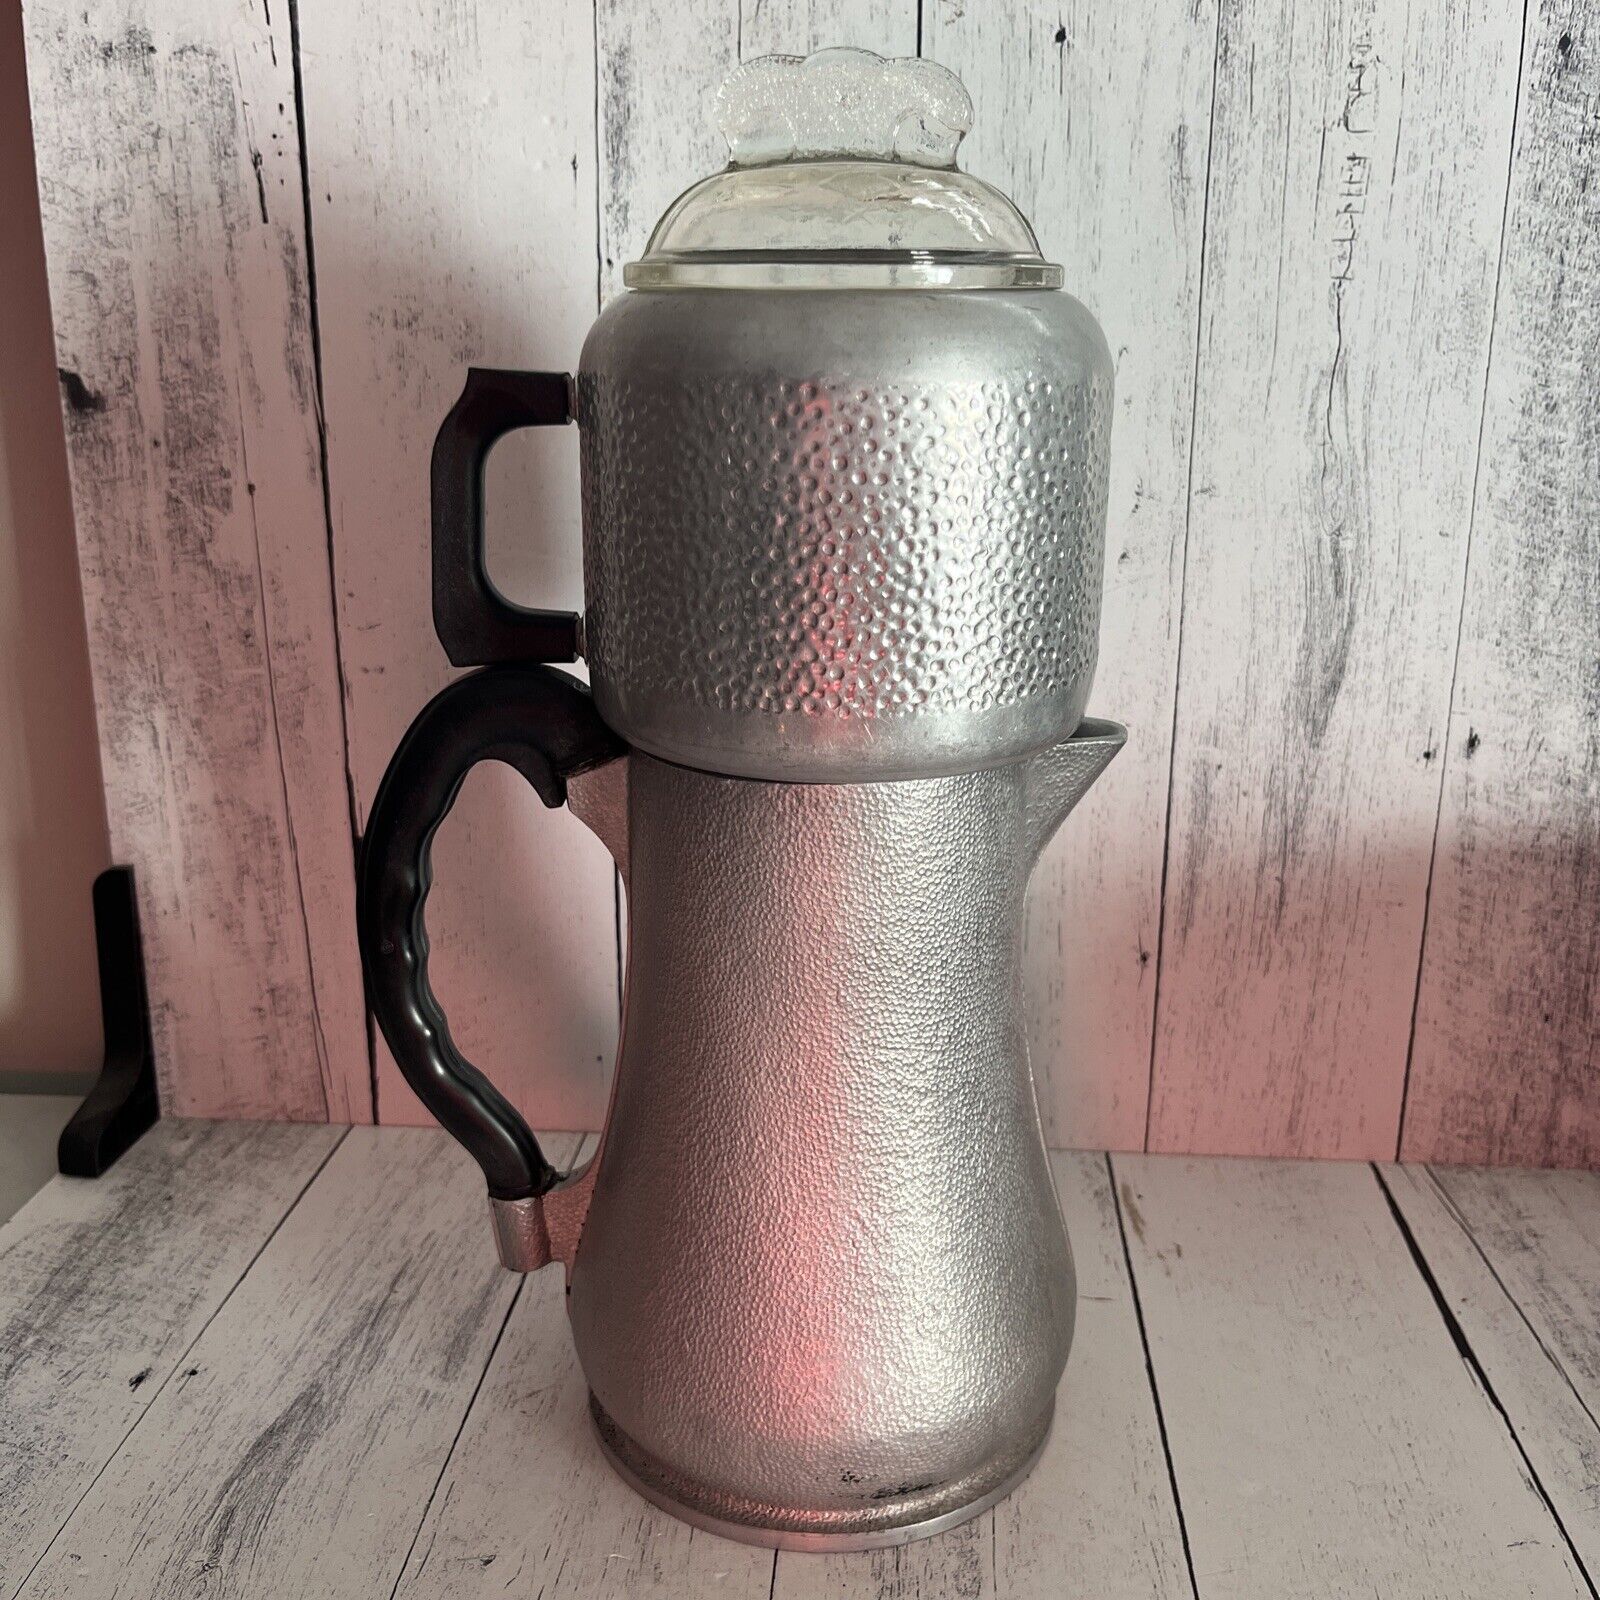 Vintage Guardian Service 8 Cup Hammered Aluminum Percolator Coffee Pot. Complete